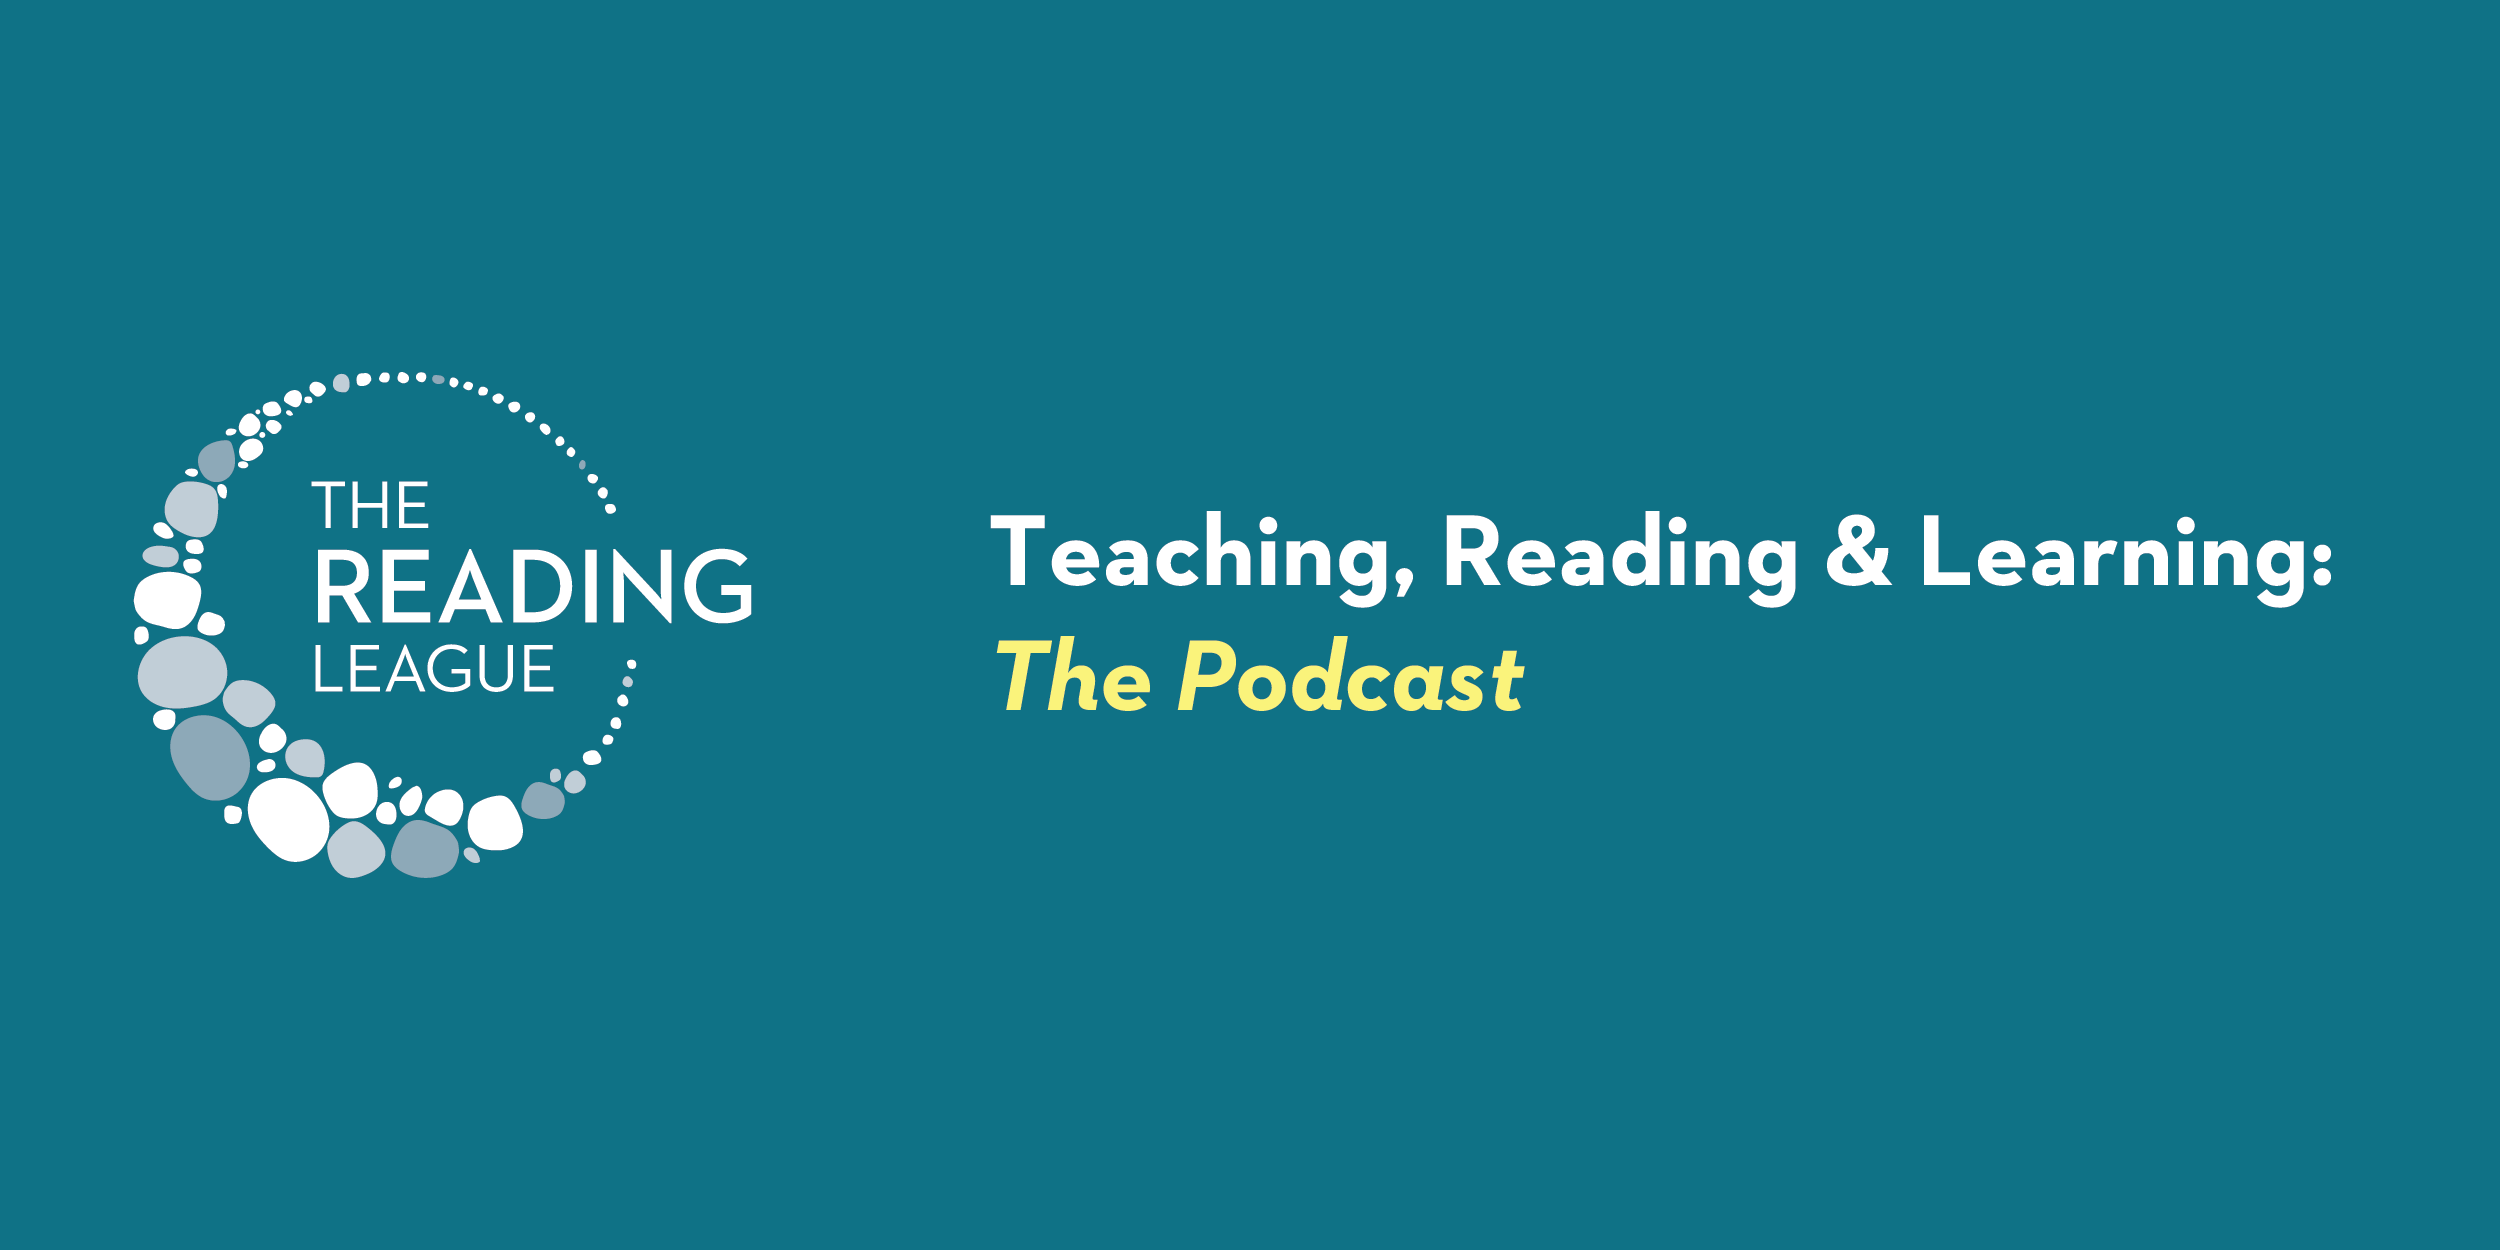 Teaching, Reading & Learning: The Podcast